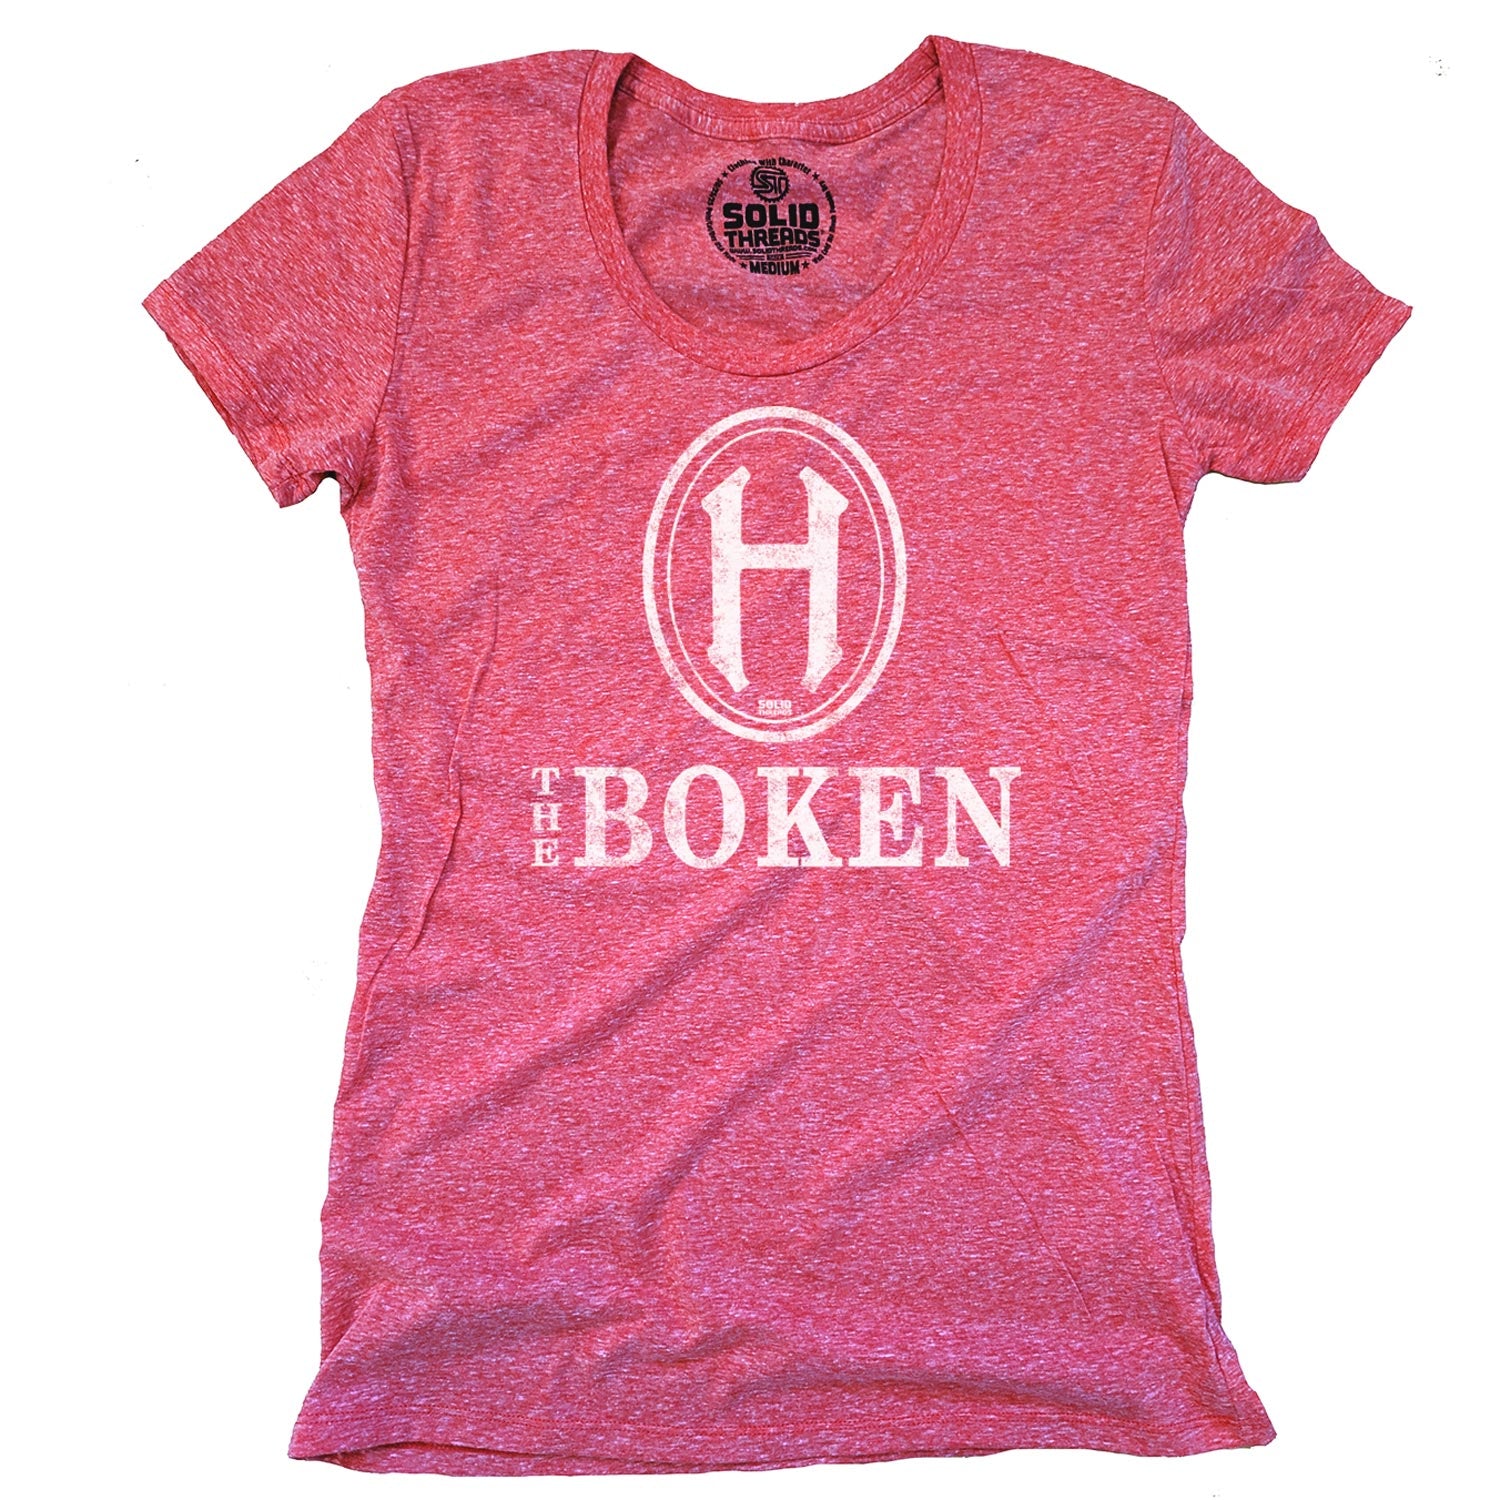 Women's The Boken Vintage T-shirt | SOLID THREADS